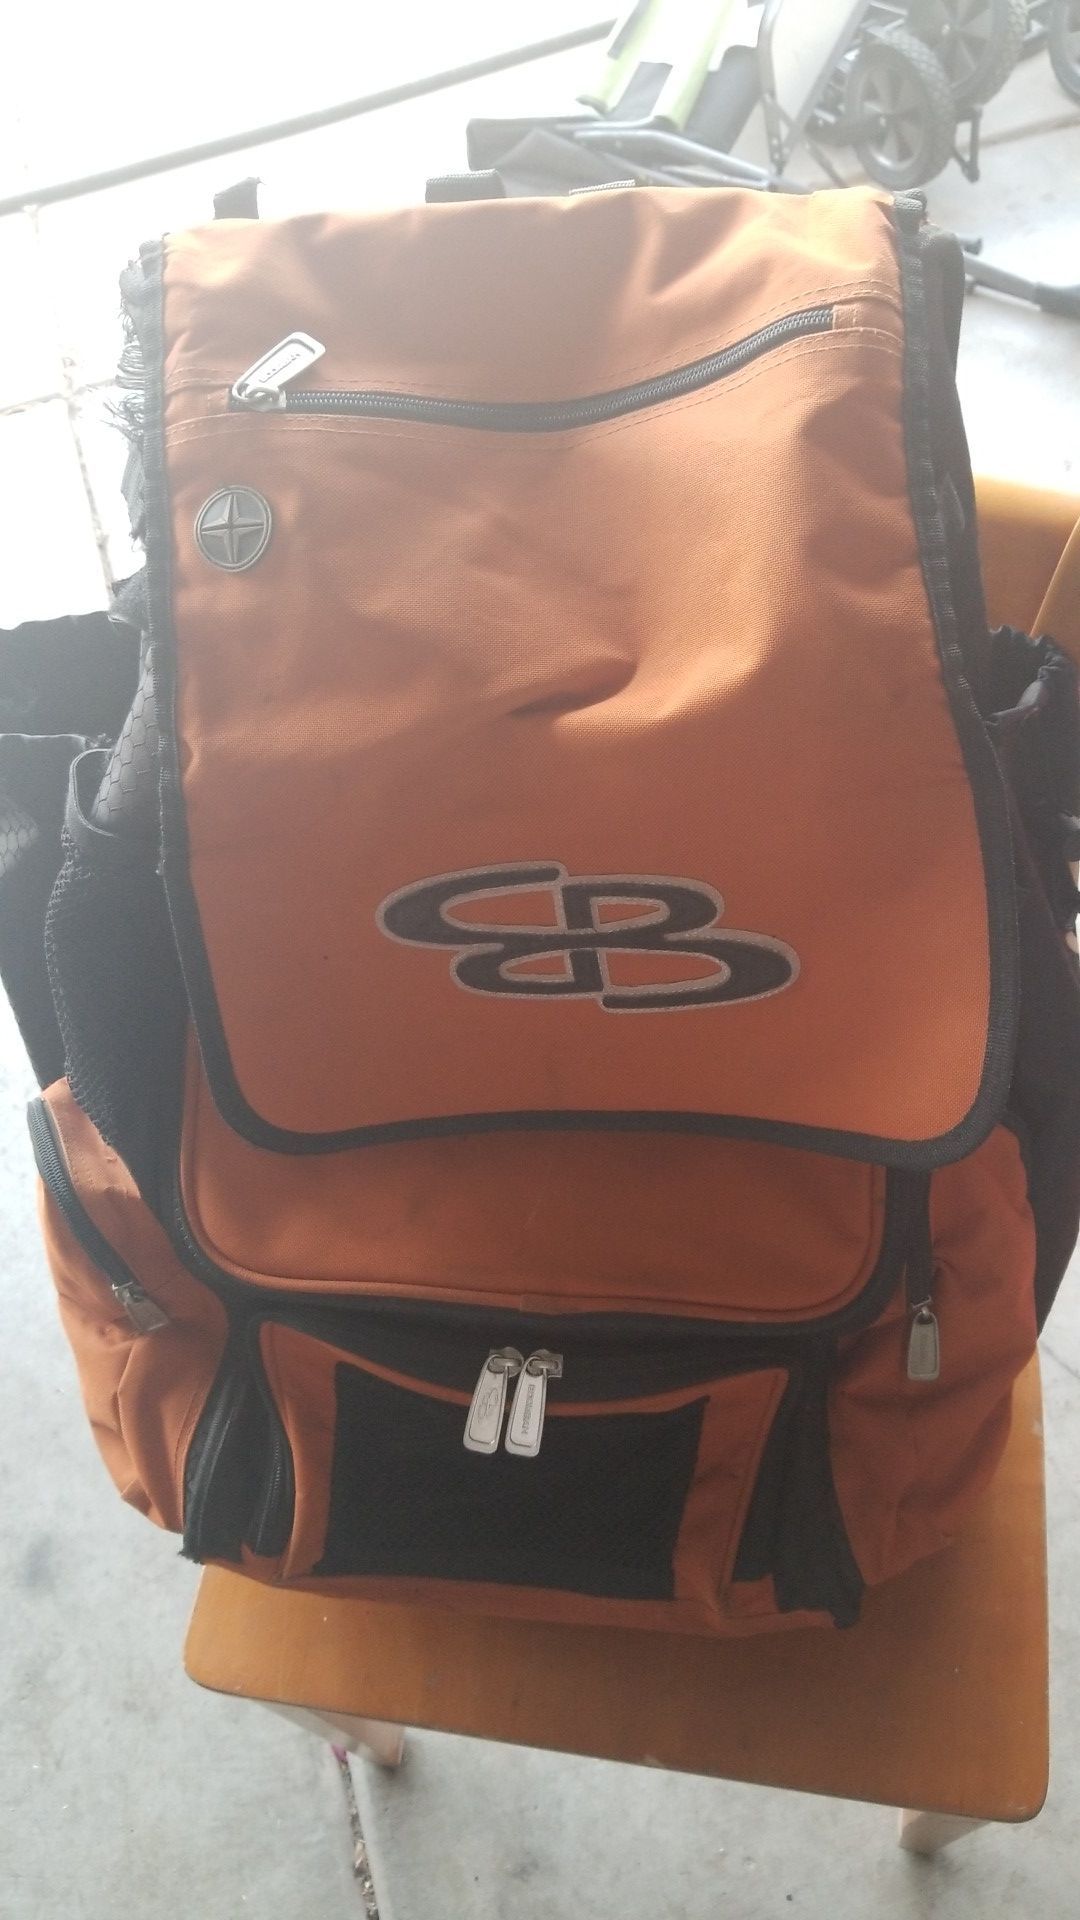 Boombah brand backpack